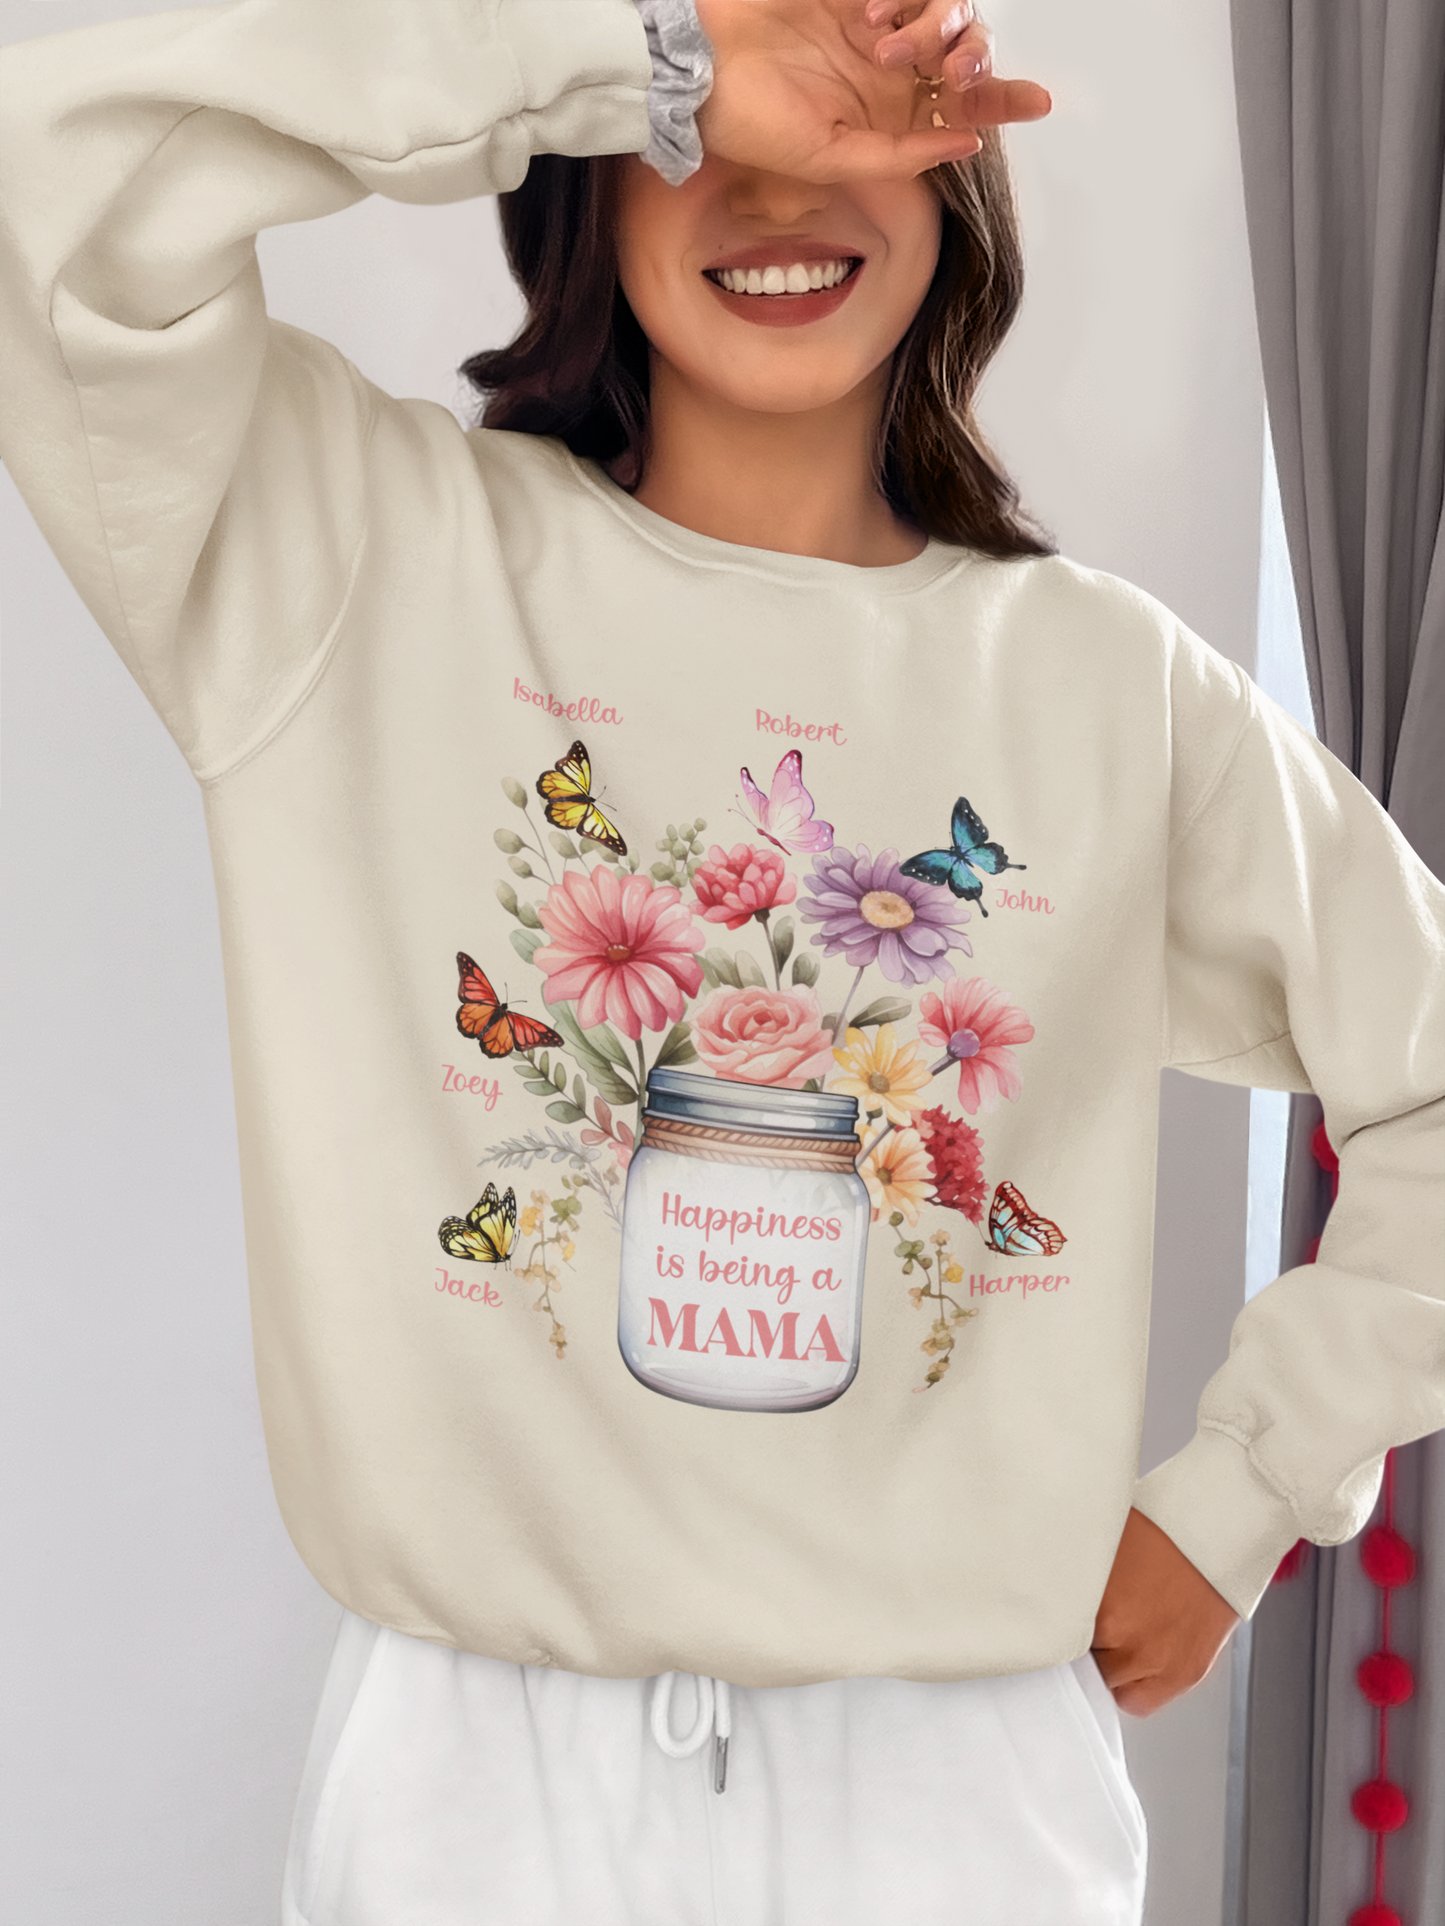 Happiness Being A Mama shirt,  Floral Grandma Mimi Nana, Mom Life, Mom Shirt,  Personalized Grandma Shirt, Happiness is Being a Grandma T-Shirt, Grandma Gift, Mother's Day Gift for Grandma, Customized Mother's Day Shirt